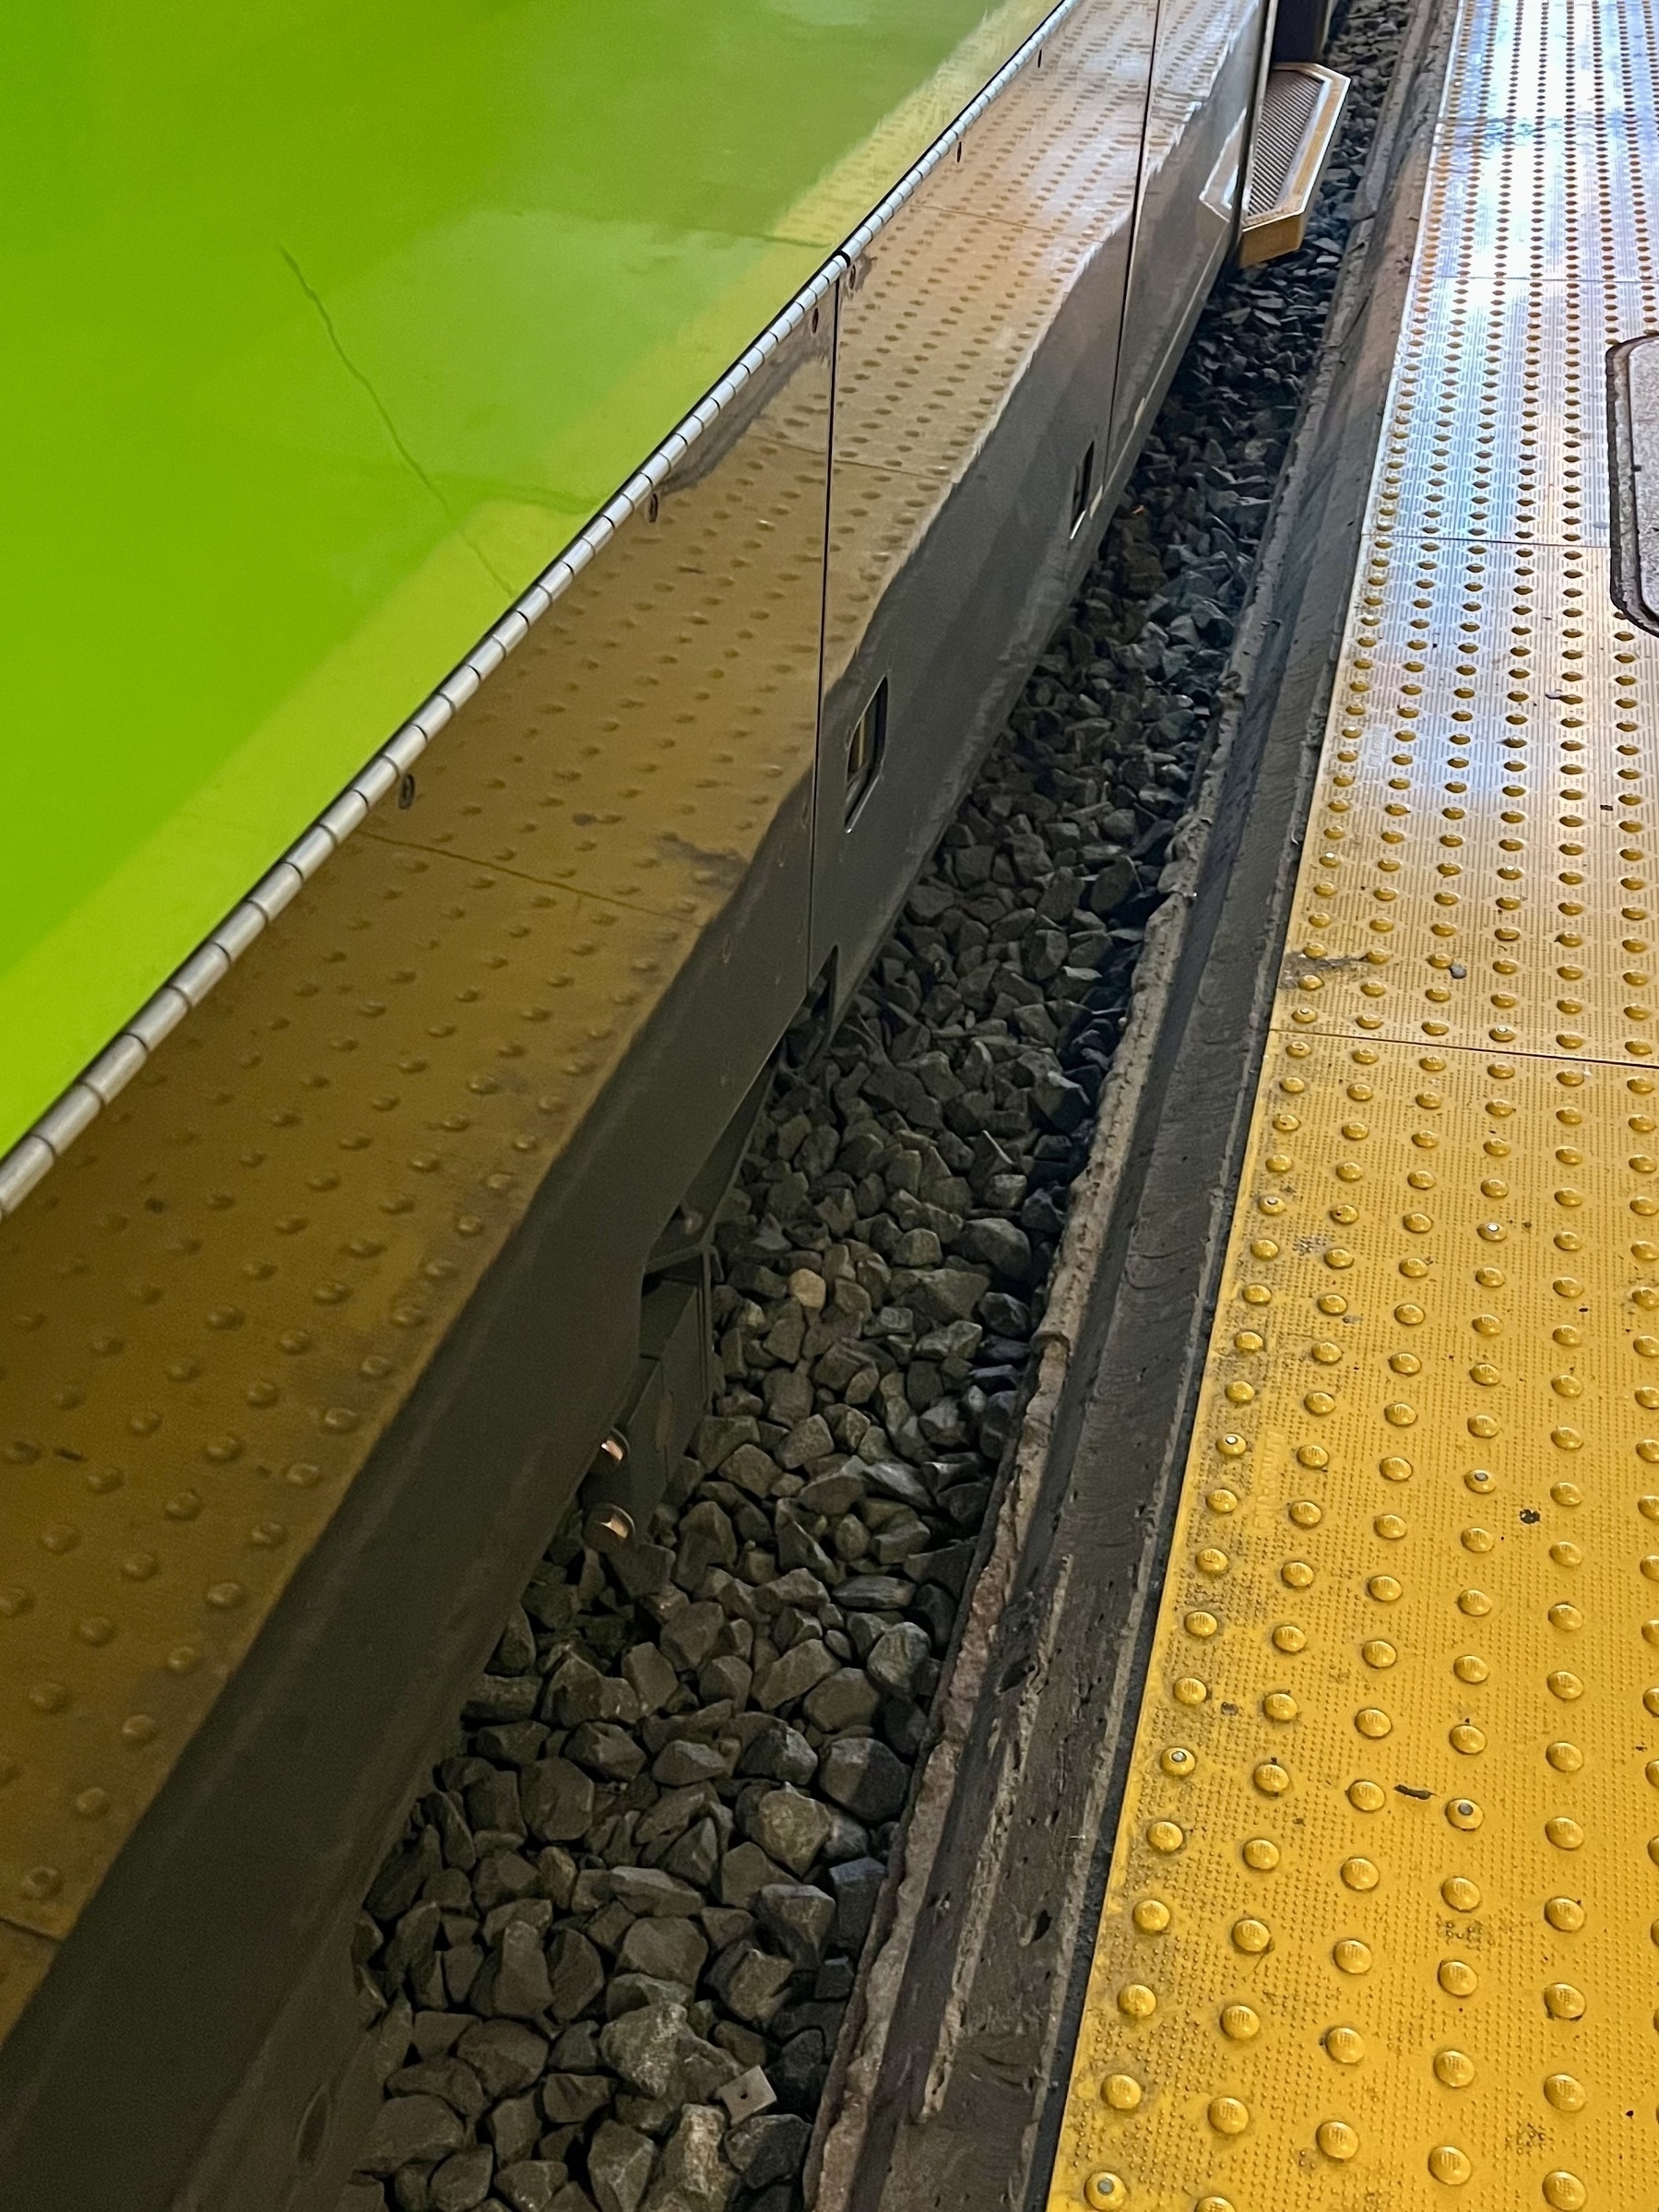 Edge of the train platform with yellow warning surface